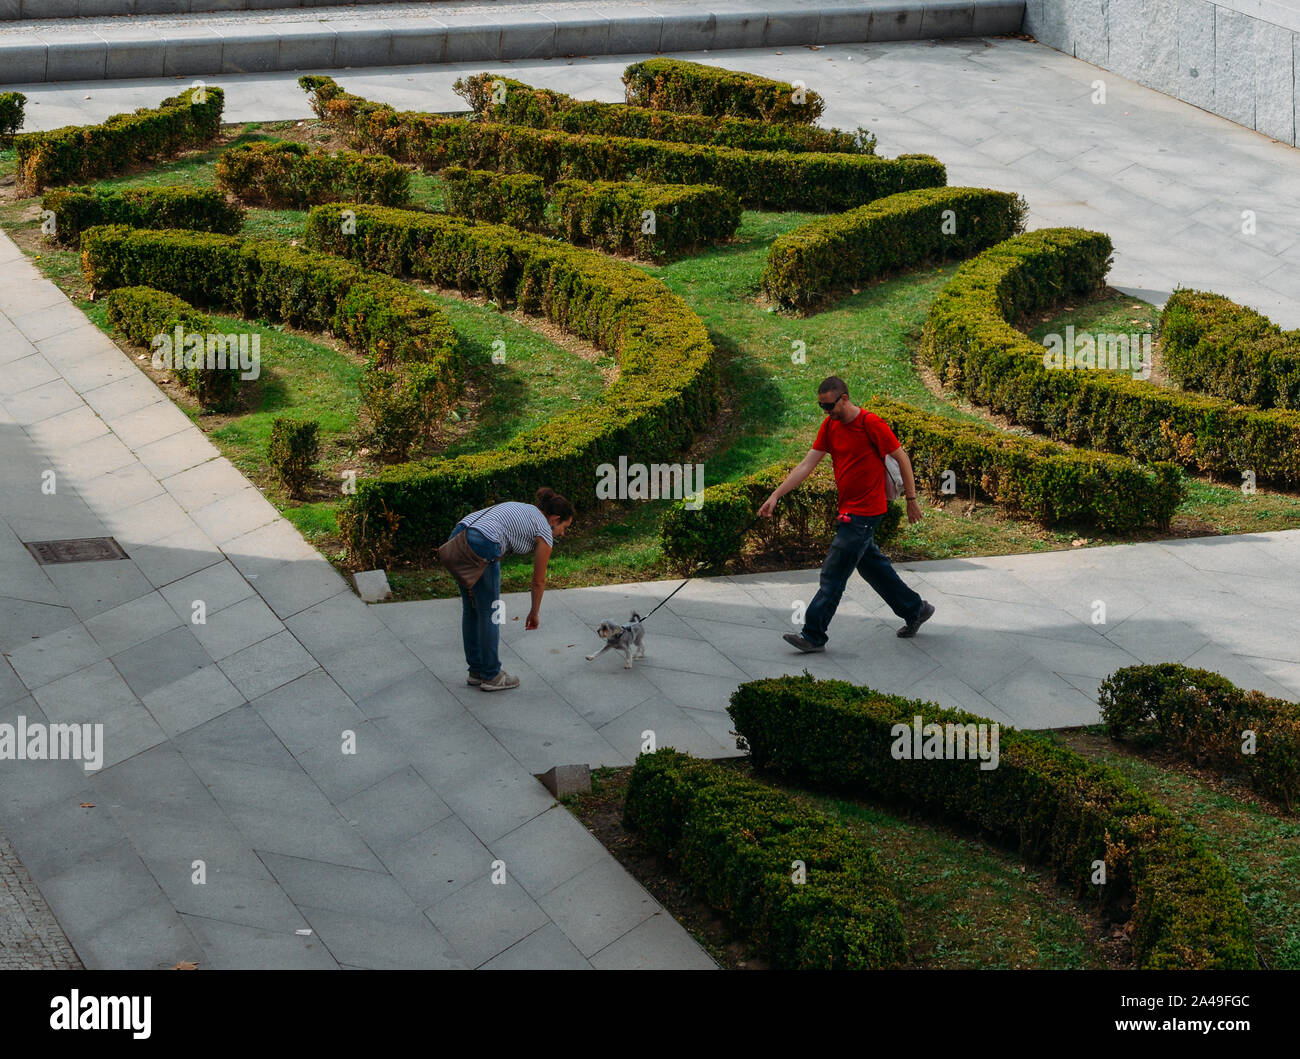 Madrid, Spain - Oct 13, 2019: Man, woman and dog having fun in a park in Madrid, Spain Stock Photo